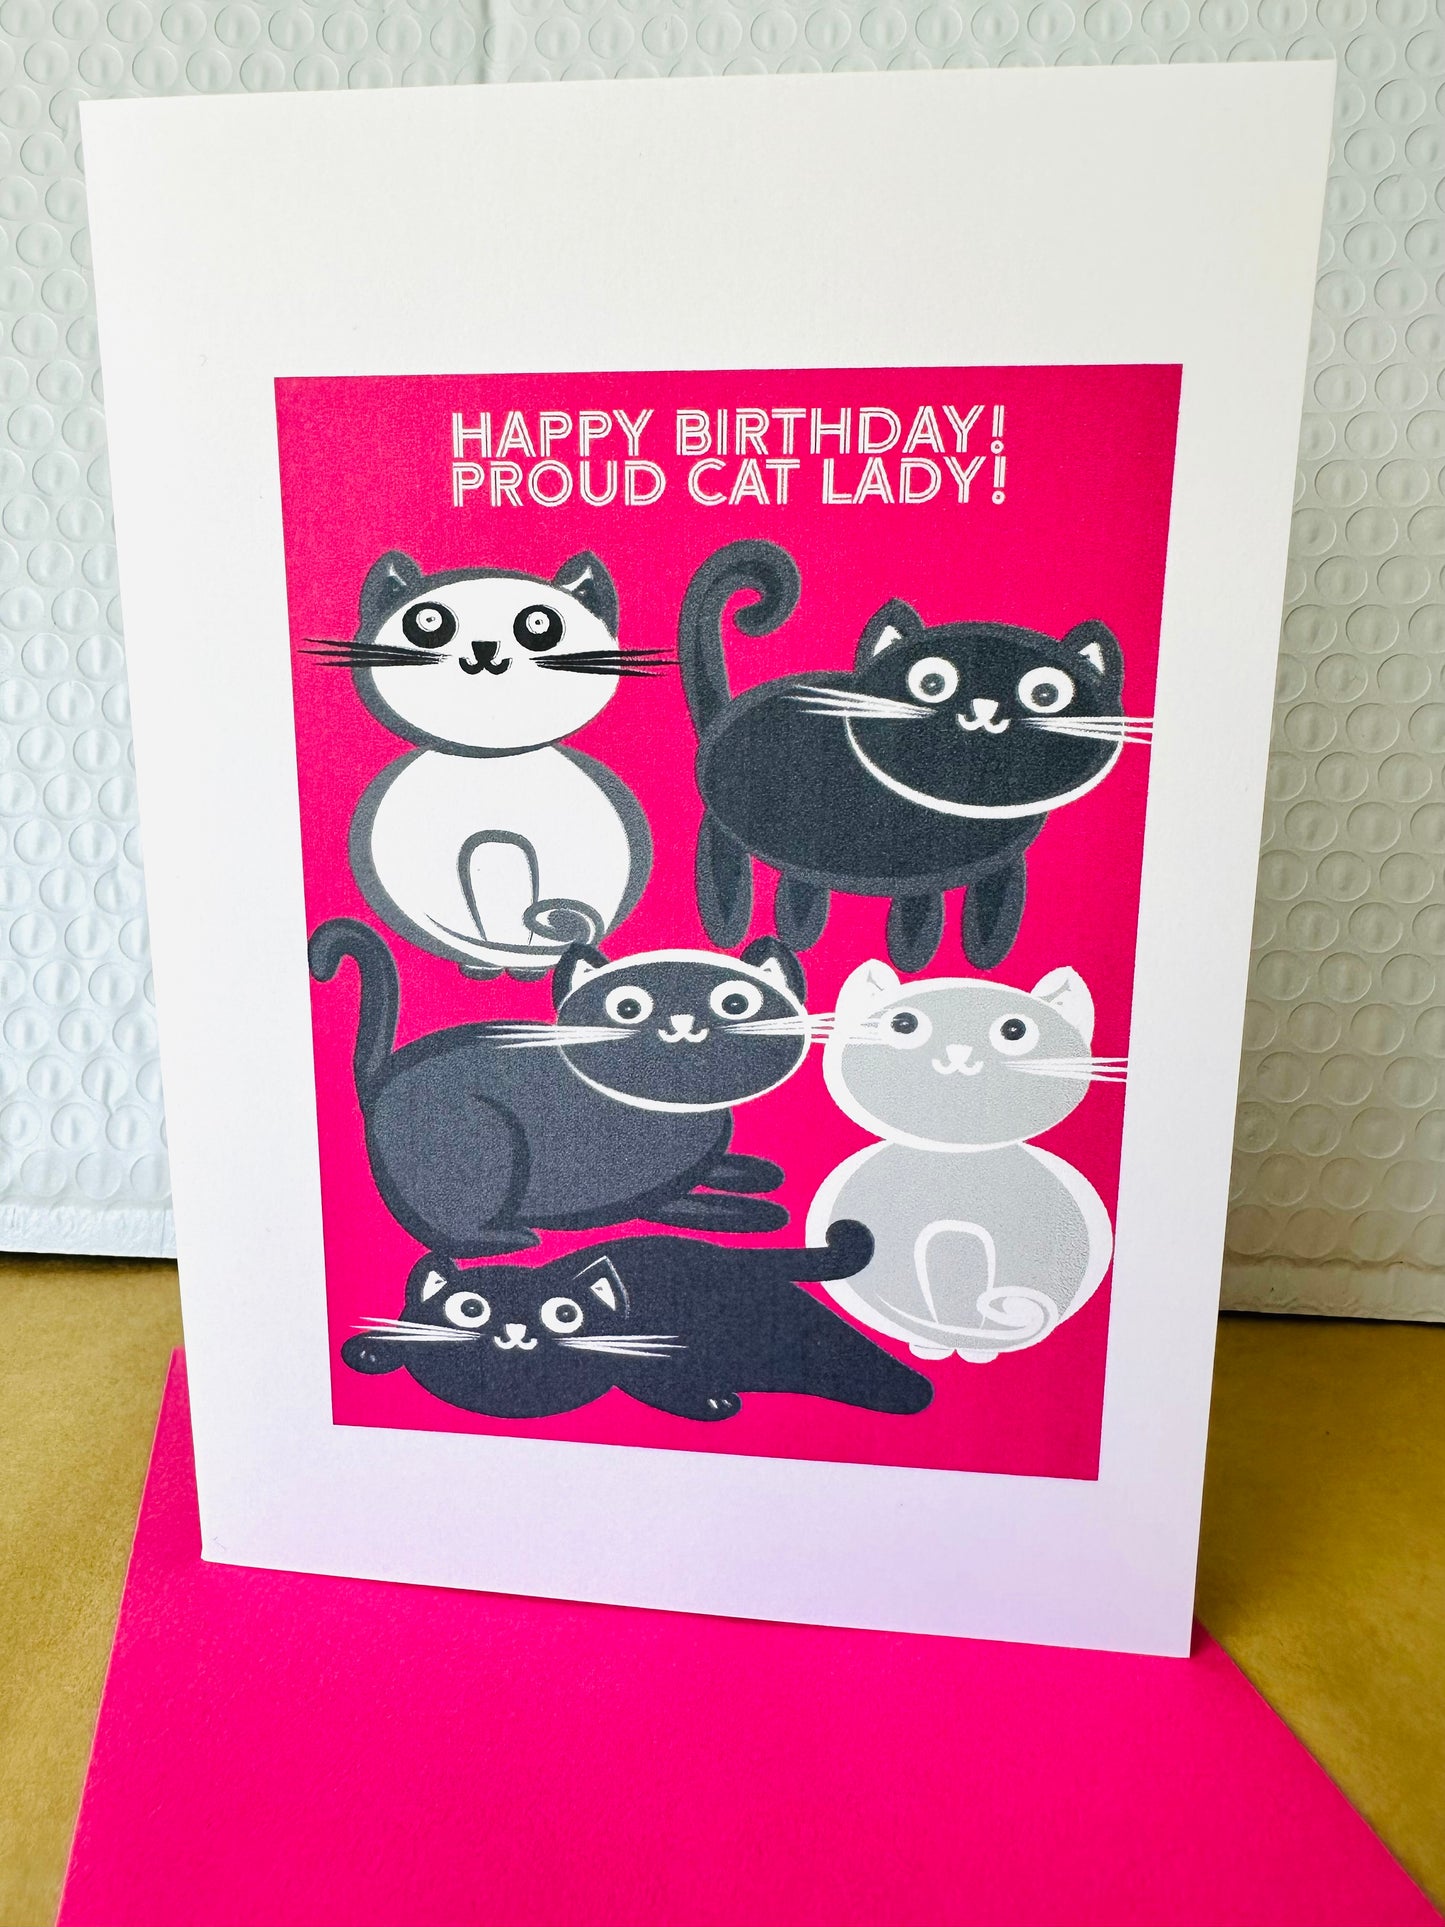 Happy Birthday Cat Lady! 5X7 Cat greeting card for those cat lovers in our lives